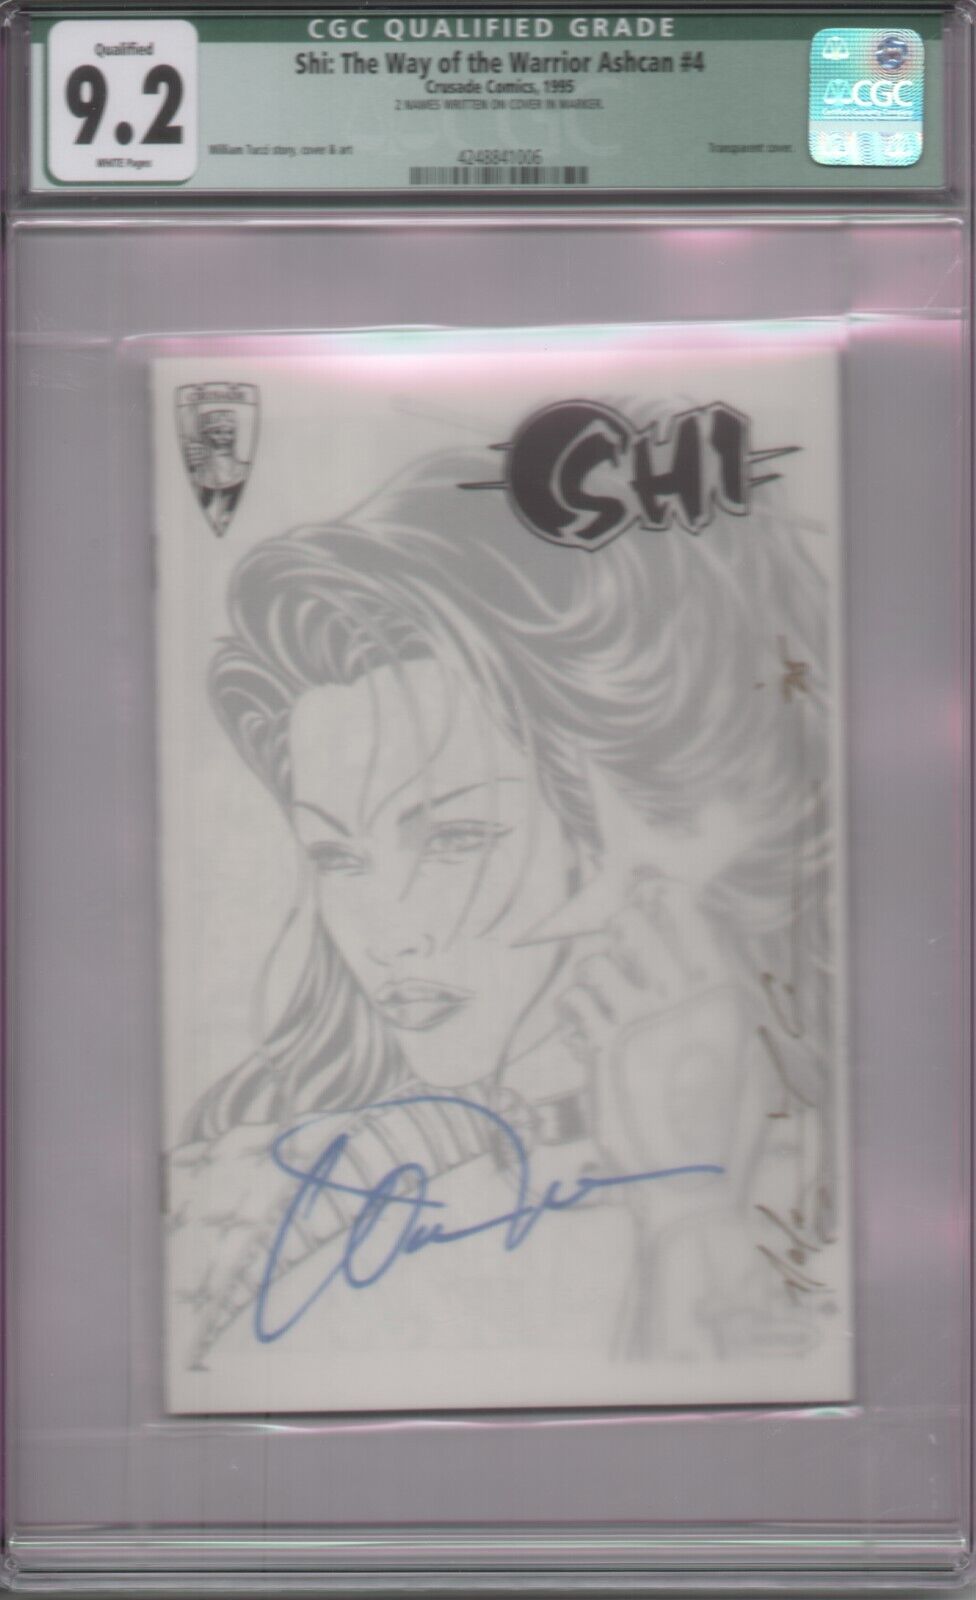 Shi: Way of the Warrior #4 Ashcan Signed CGC 9.2